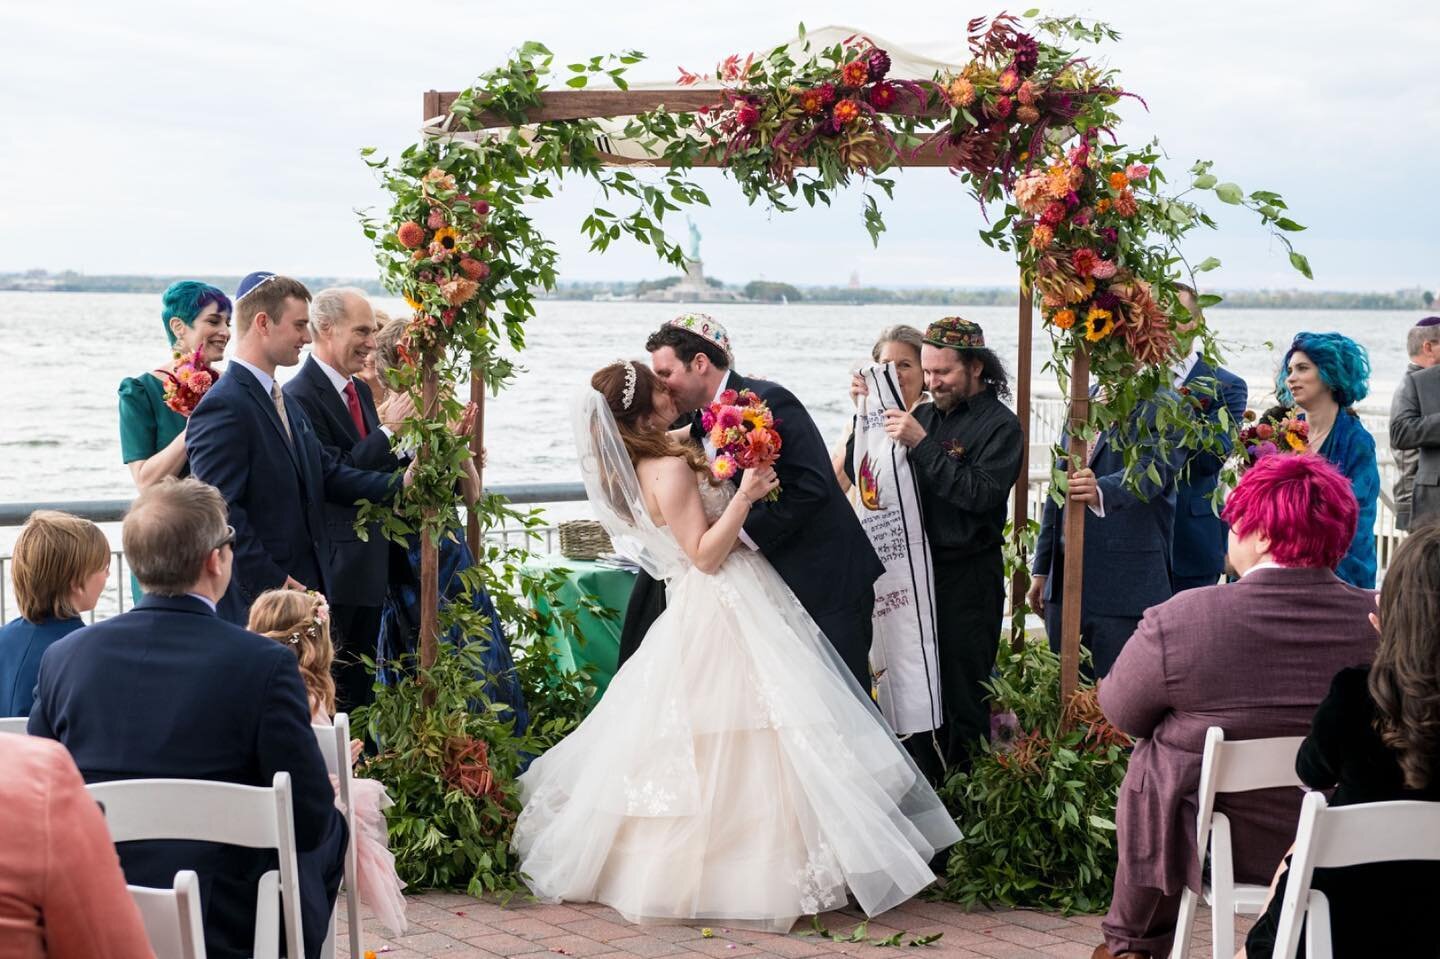 Thank you to @davidperlmanphotography for capturing our gorgeous wedding ceremony so beautifully! And thanks to @bwpfloral for the stunning chuppah. And thanks to @ytmdrr for marrying me. 🥰

#chuppah #brooklynwedding #igotmarried #mazeltov